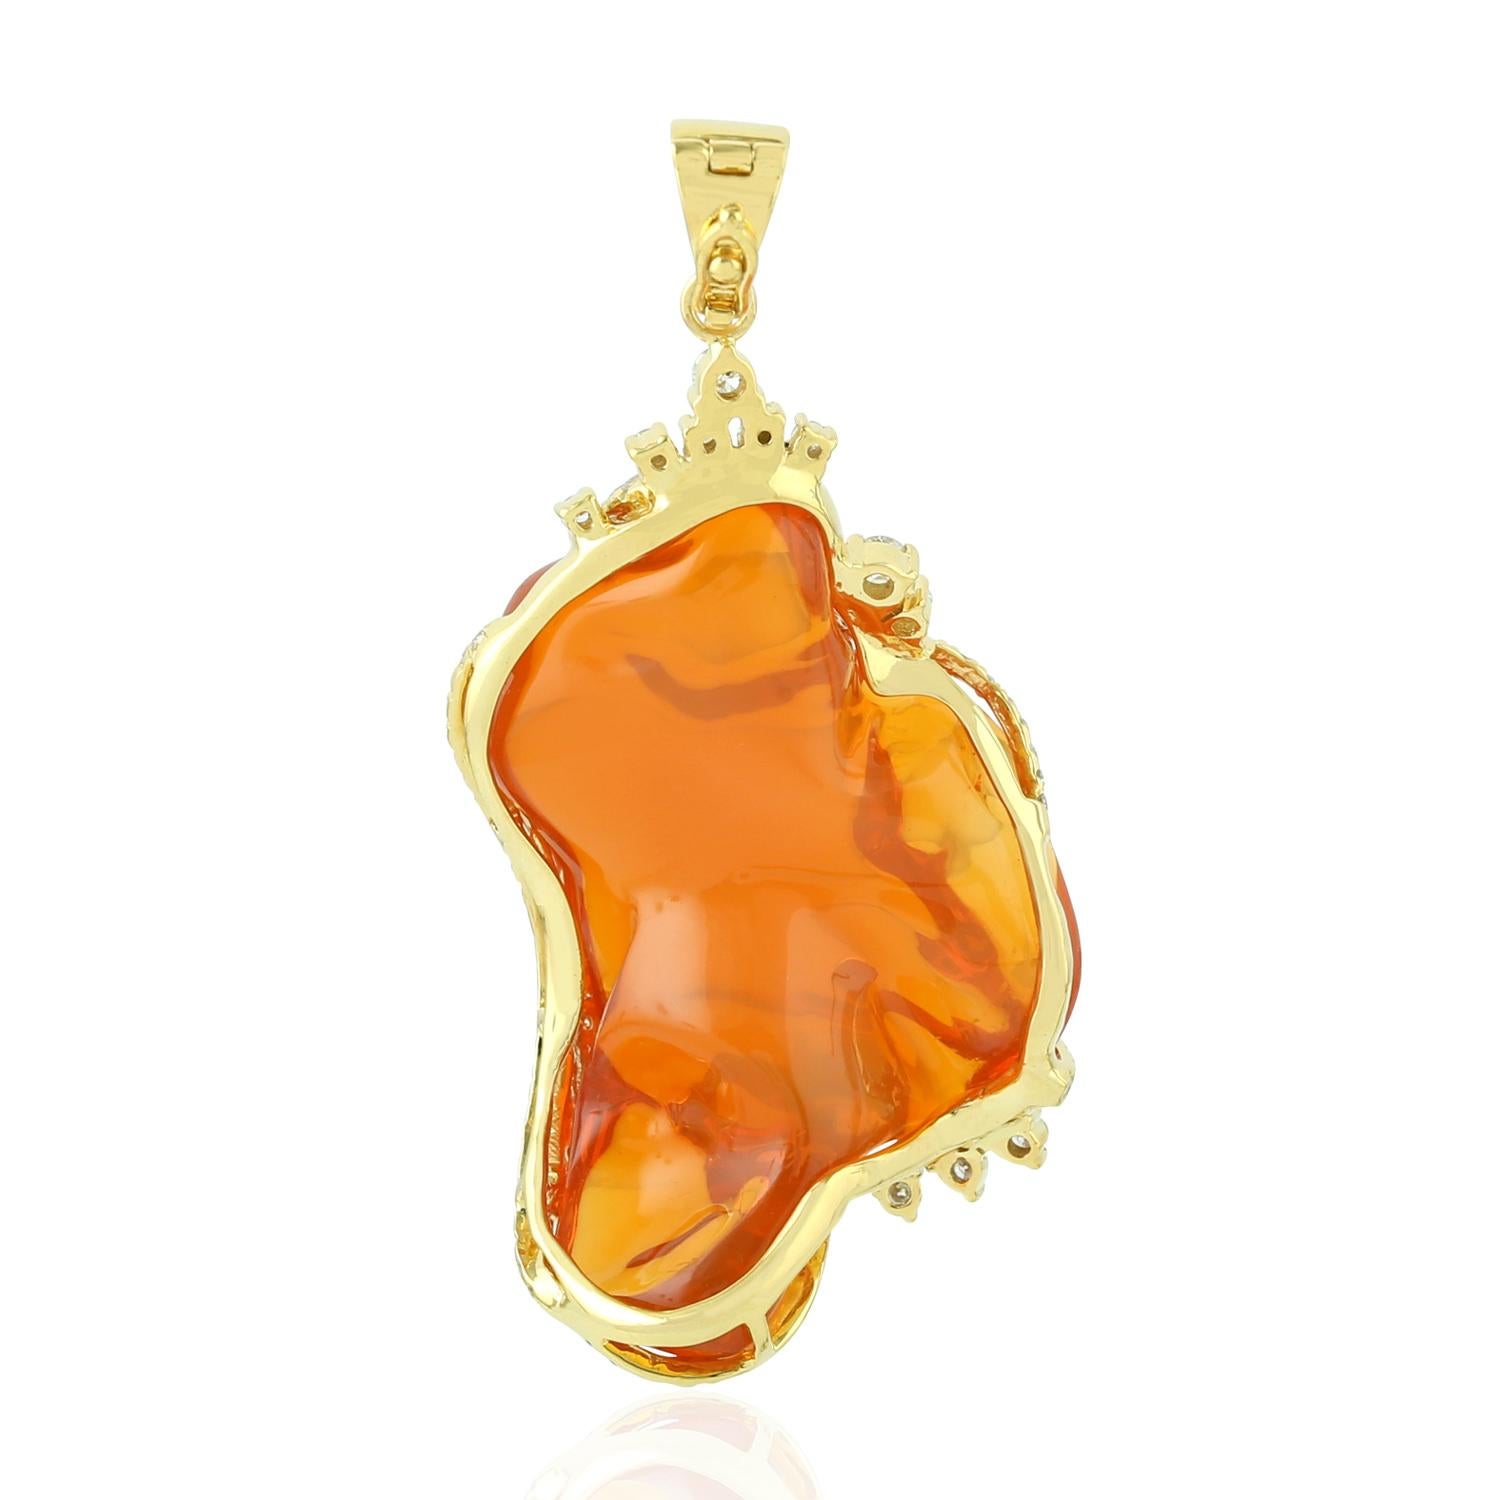 Cast in 18 Karat gold, this beautiful pendant features 40.8 carats of fire opal & 1.16 carats of sparkling diamonds. 

FOLLOW MEGHNA JEWELS storefront to view the latest collection & exclusive pieces. Meghna Jewels is proudly rated as a Top Seller